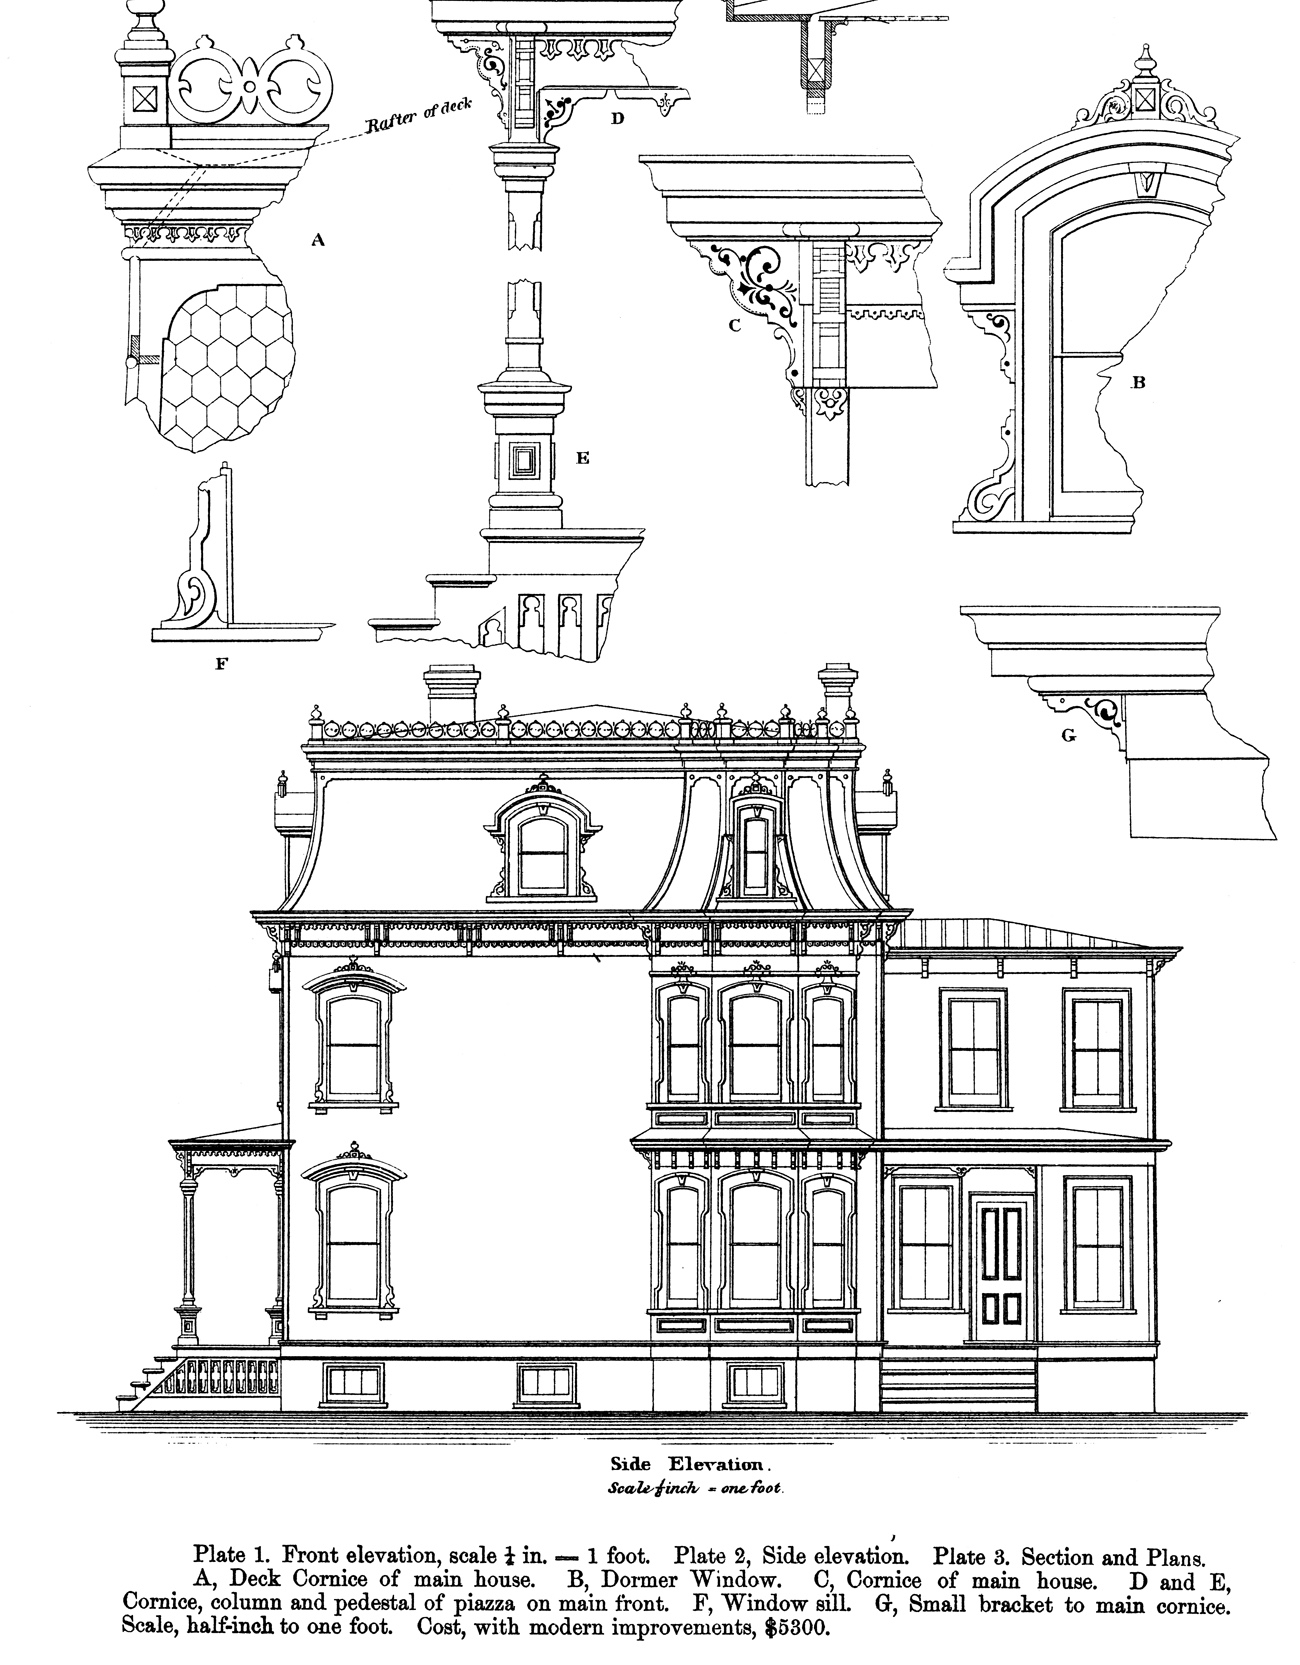 Architectural Styles